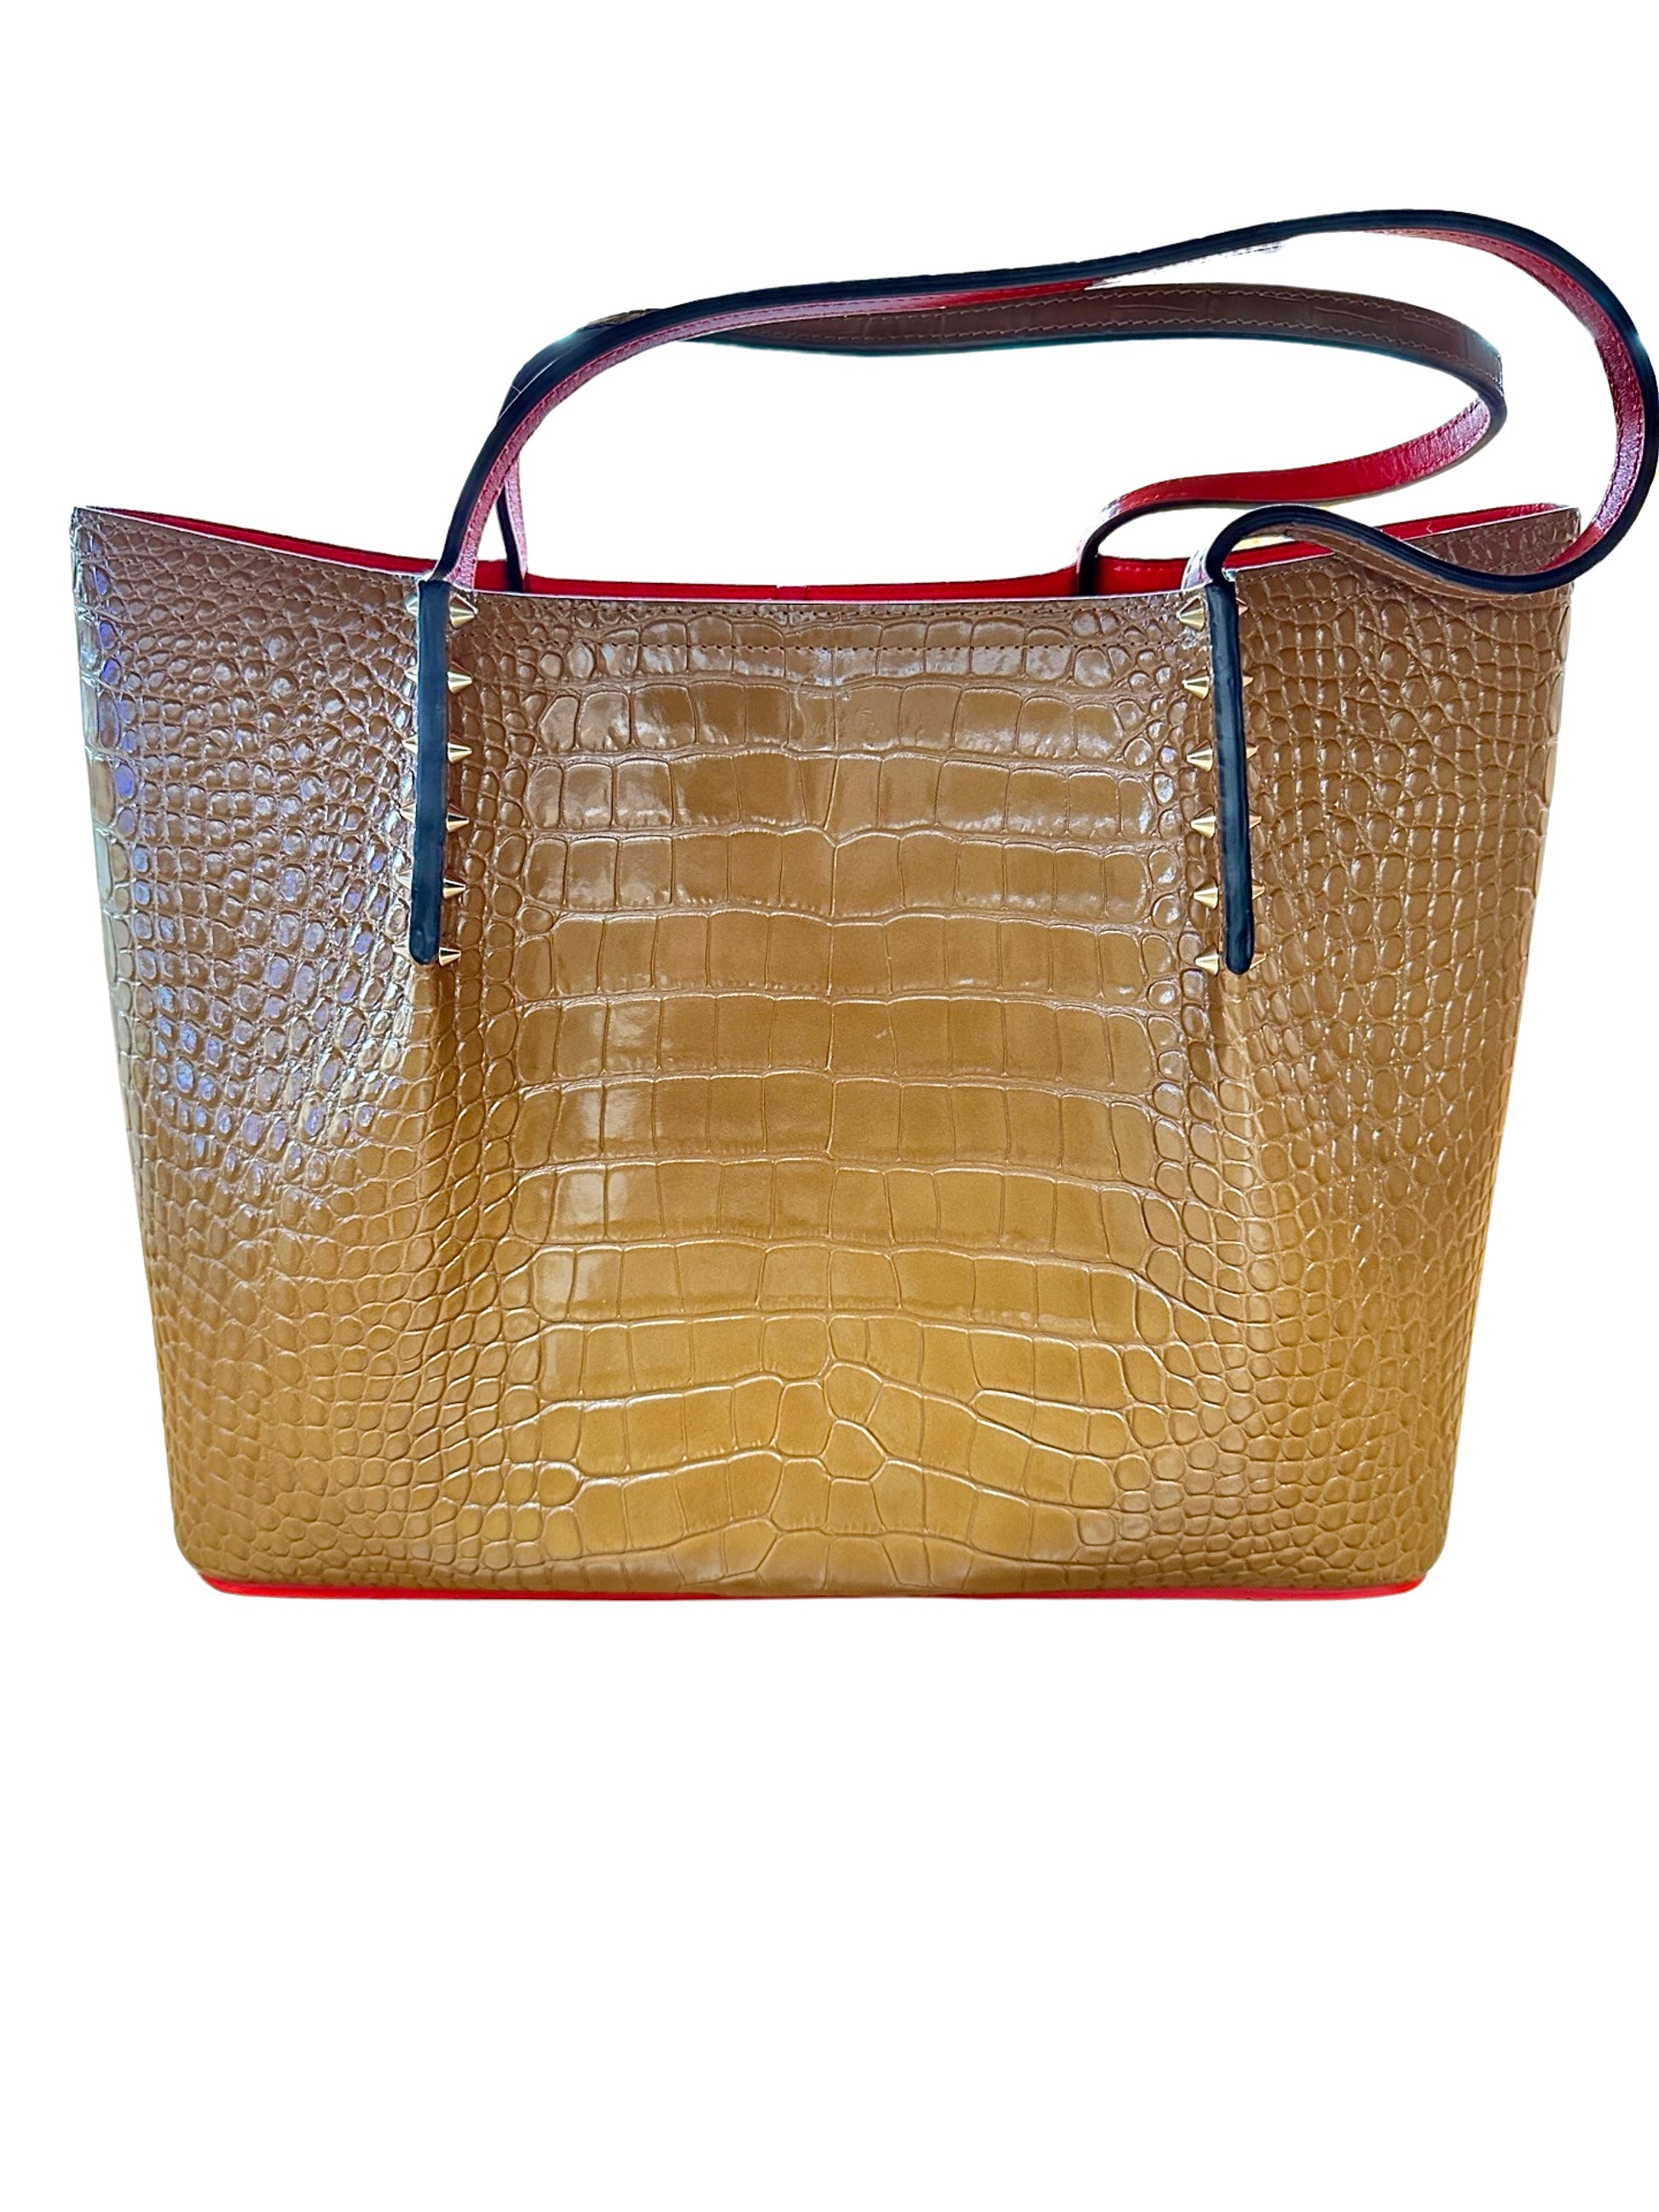 Front of brown tote bag with crocodile-like detailing and gold spike detailing. Shoulder straps are out of shape.